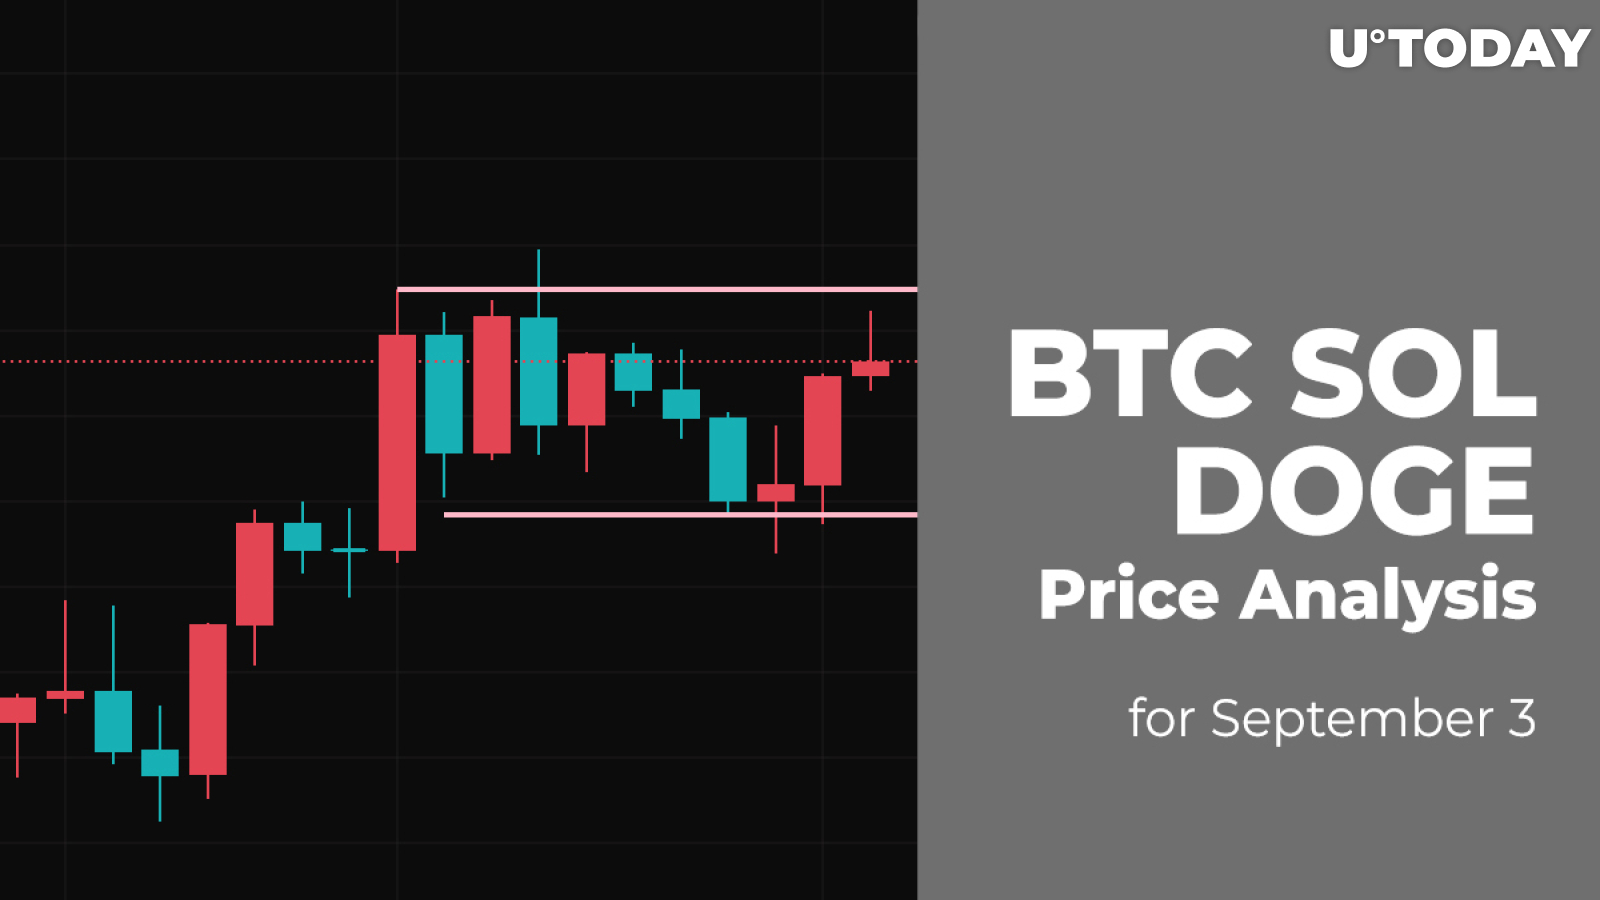 BTC, SOL and DOGE Price Analysis for September 3